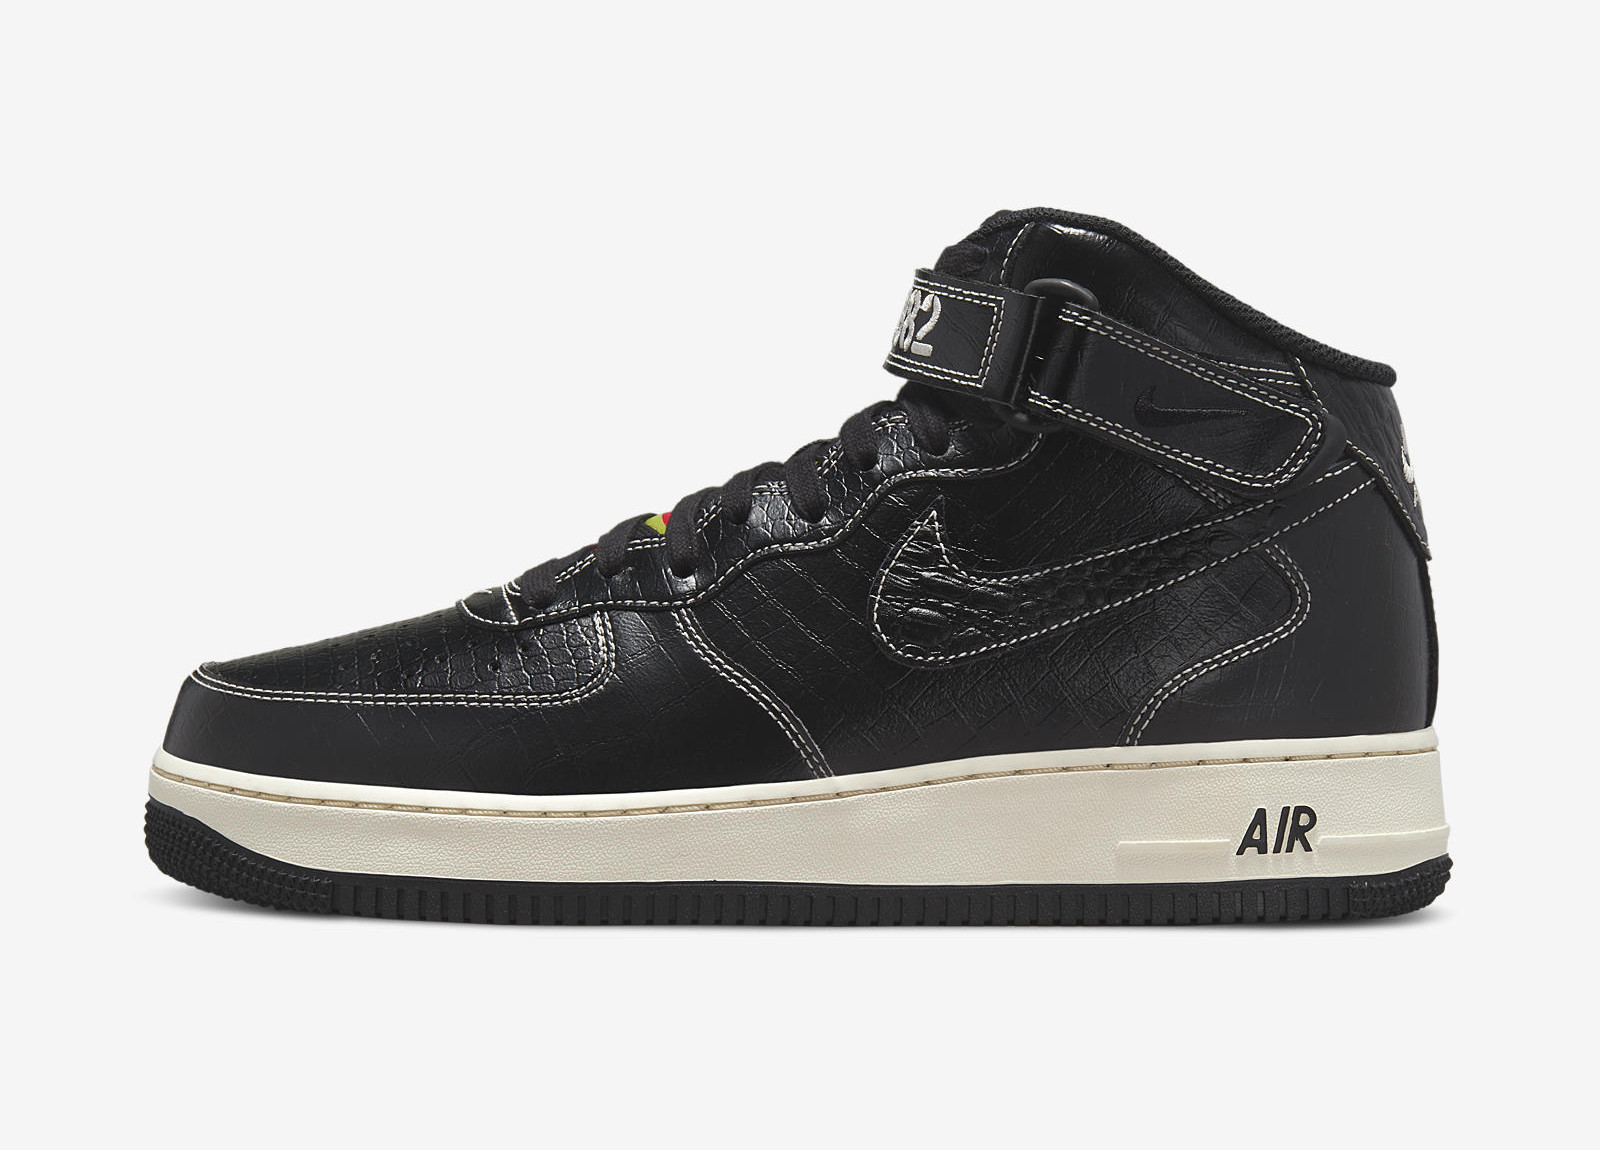 Nike Air Force 1 Mid
« Our Force 1 »